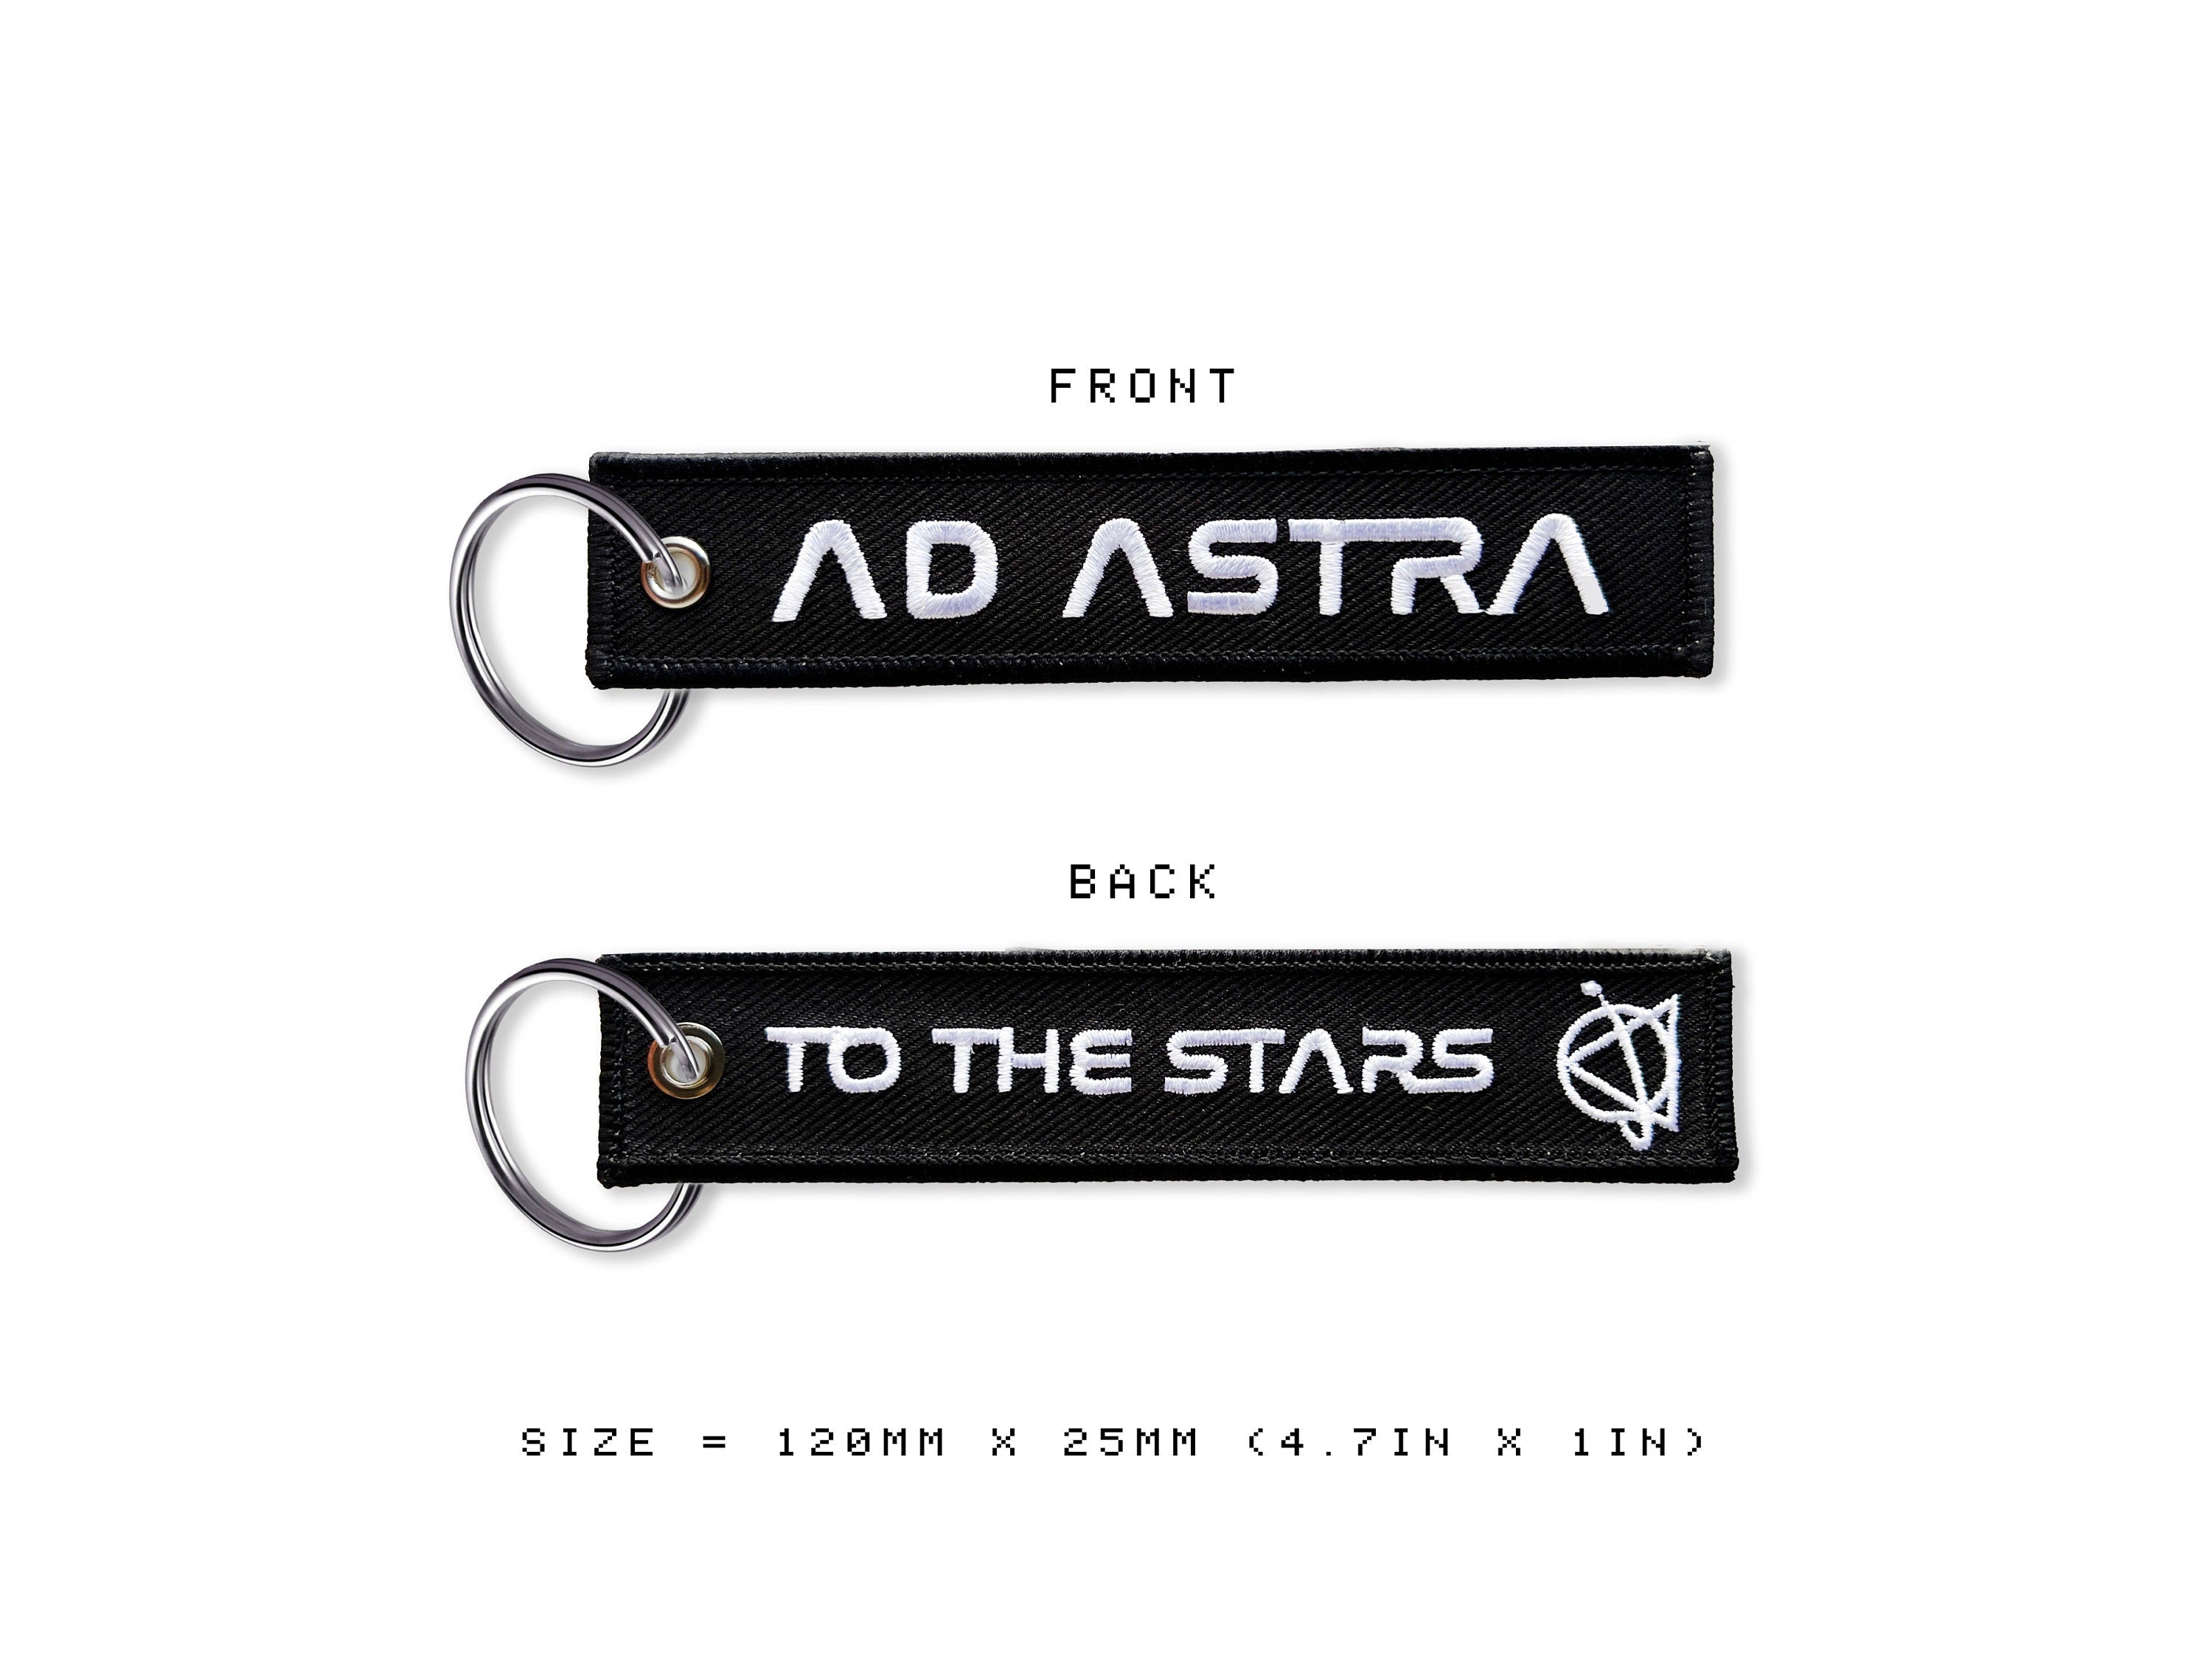 Ad Astra "Remove Before Flight" Keychain - Celestial / Space EDC Keychain - Sci-Fi Geekery / To The Stars